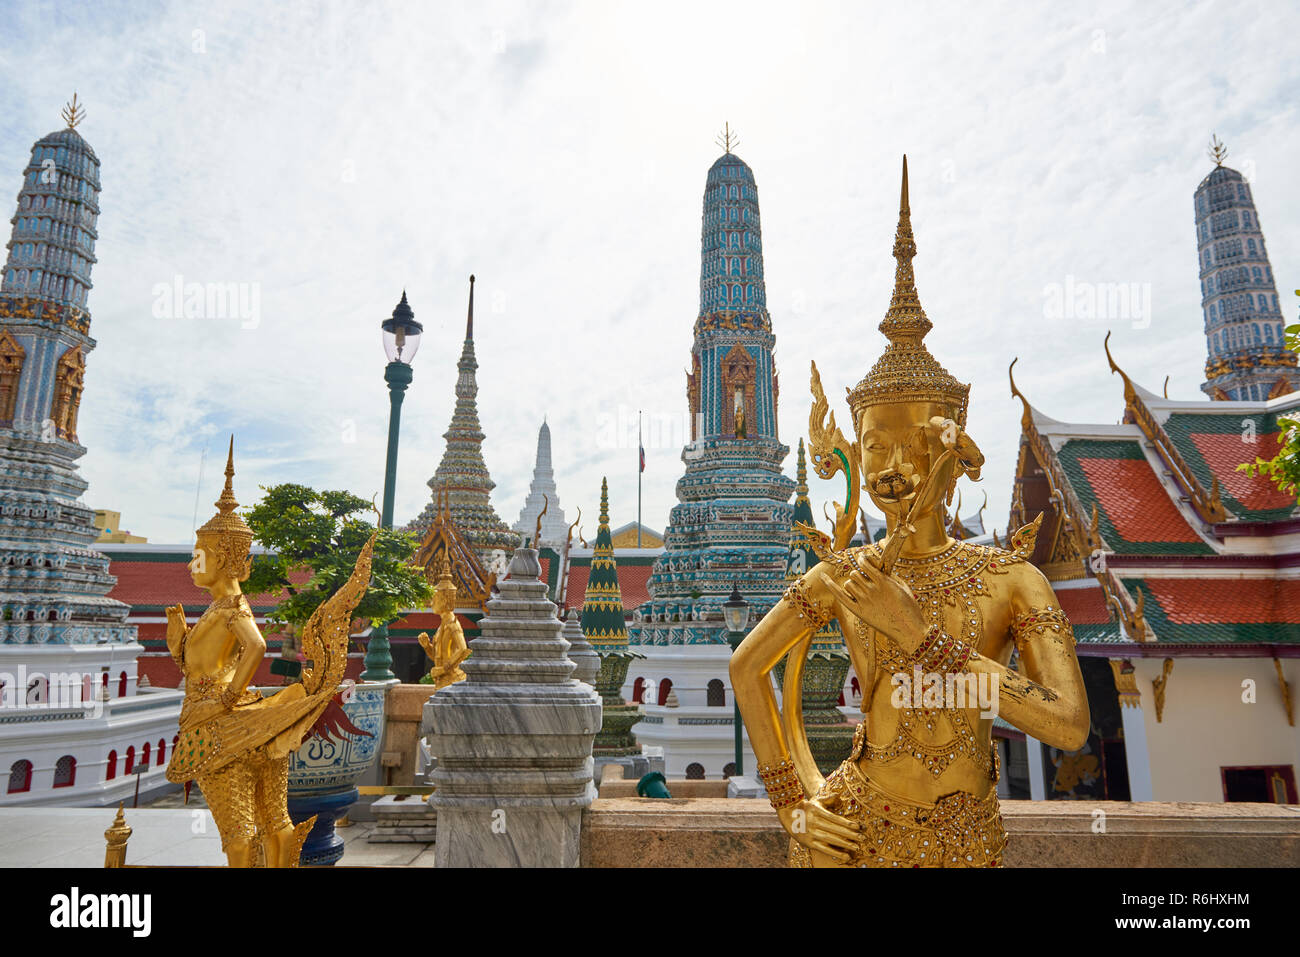 Golden dancer statues inside the Grand Palace in Bangkok, Thailand. Stock Photo